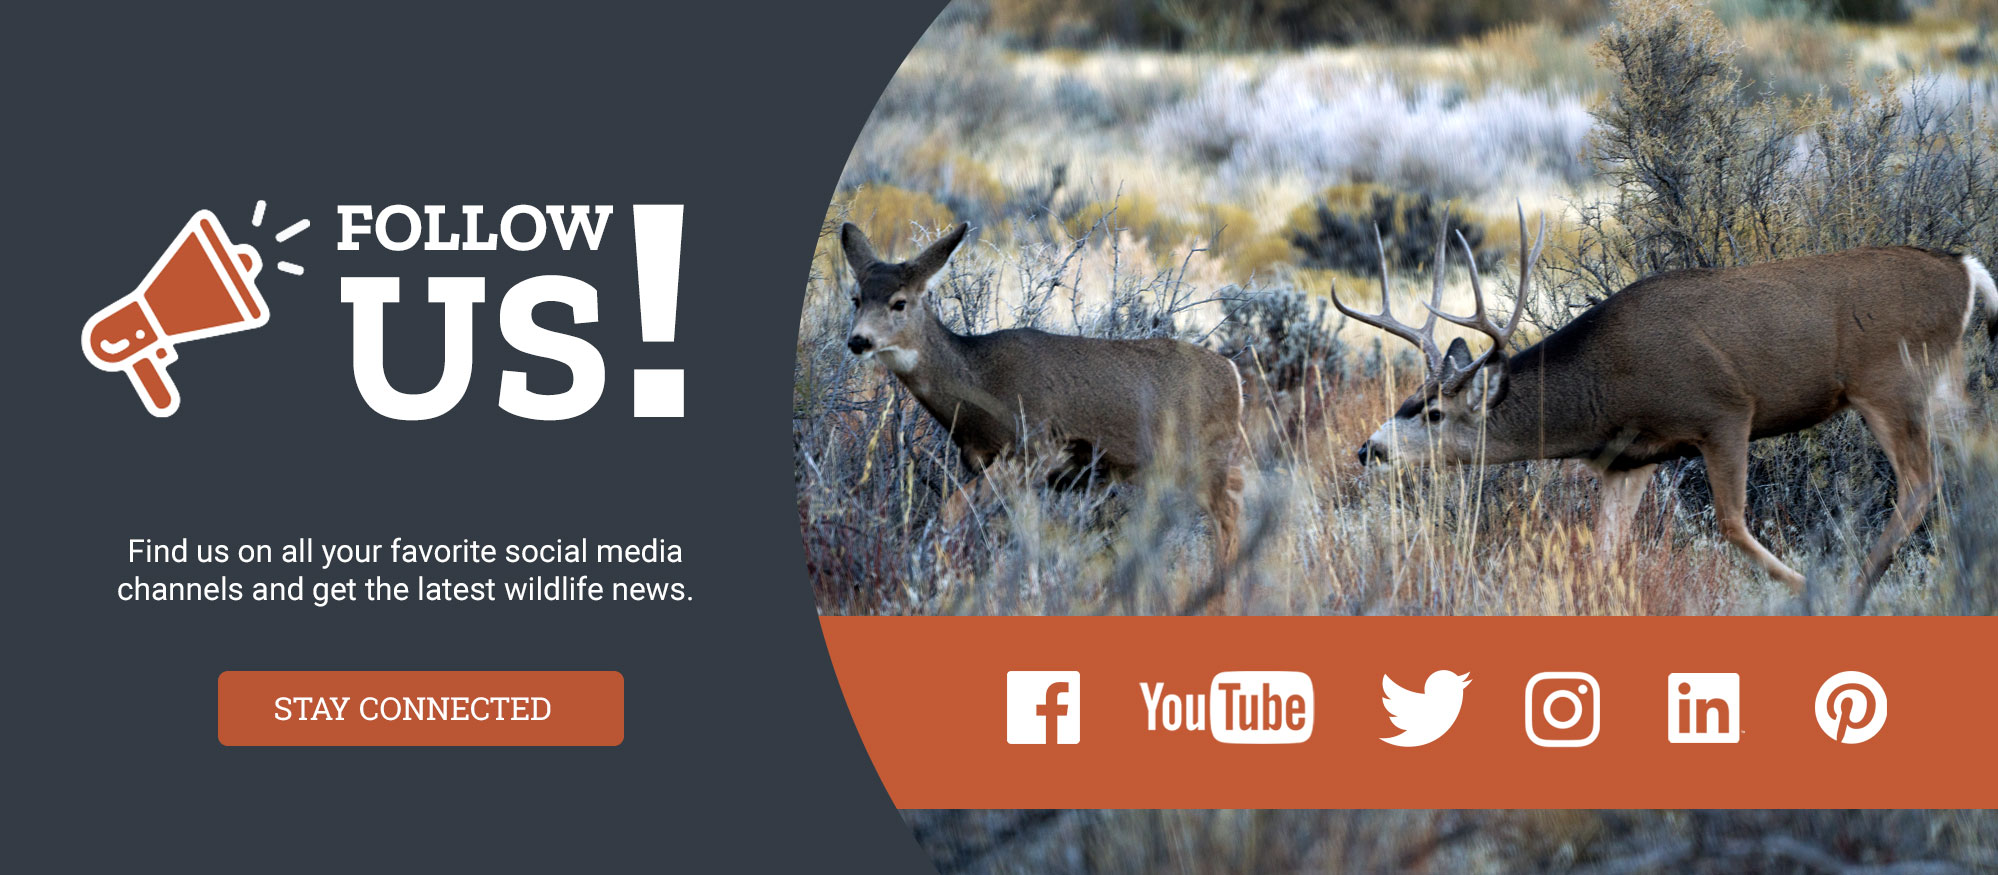 Follow us! Find us on all your favorite social media channels (e.g., Facebook, Twitter, YouTube, Instagram, etc.) and get the latest wildlife news.